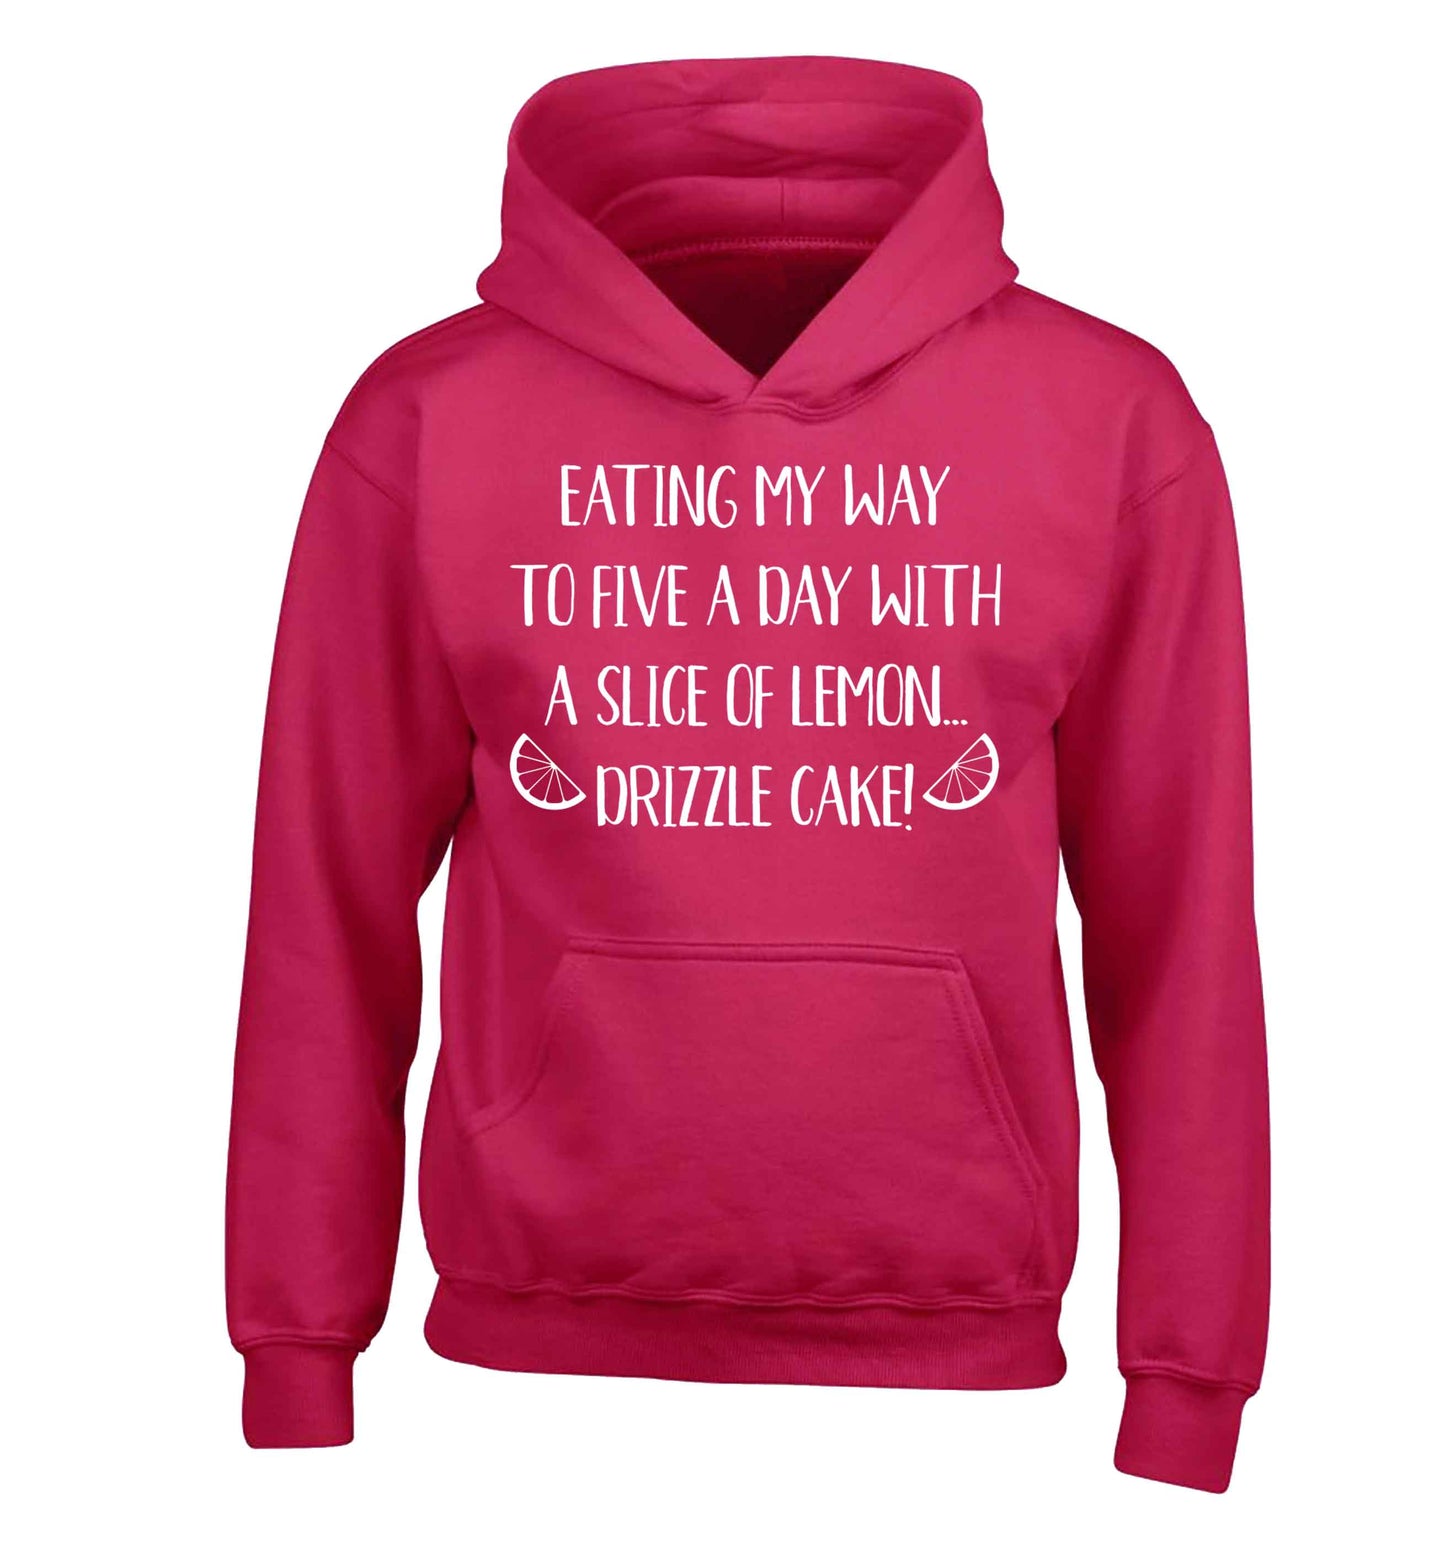 Eating my way to five a day with a slice of lemon drizzle cake day children's pink hoodie 12-13 Years